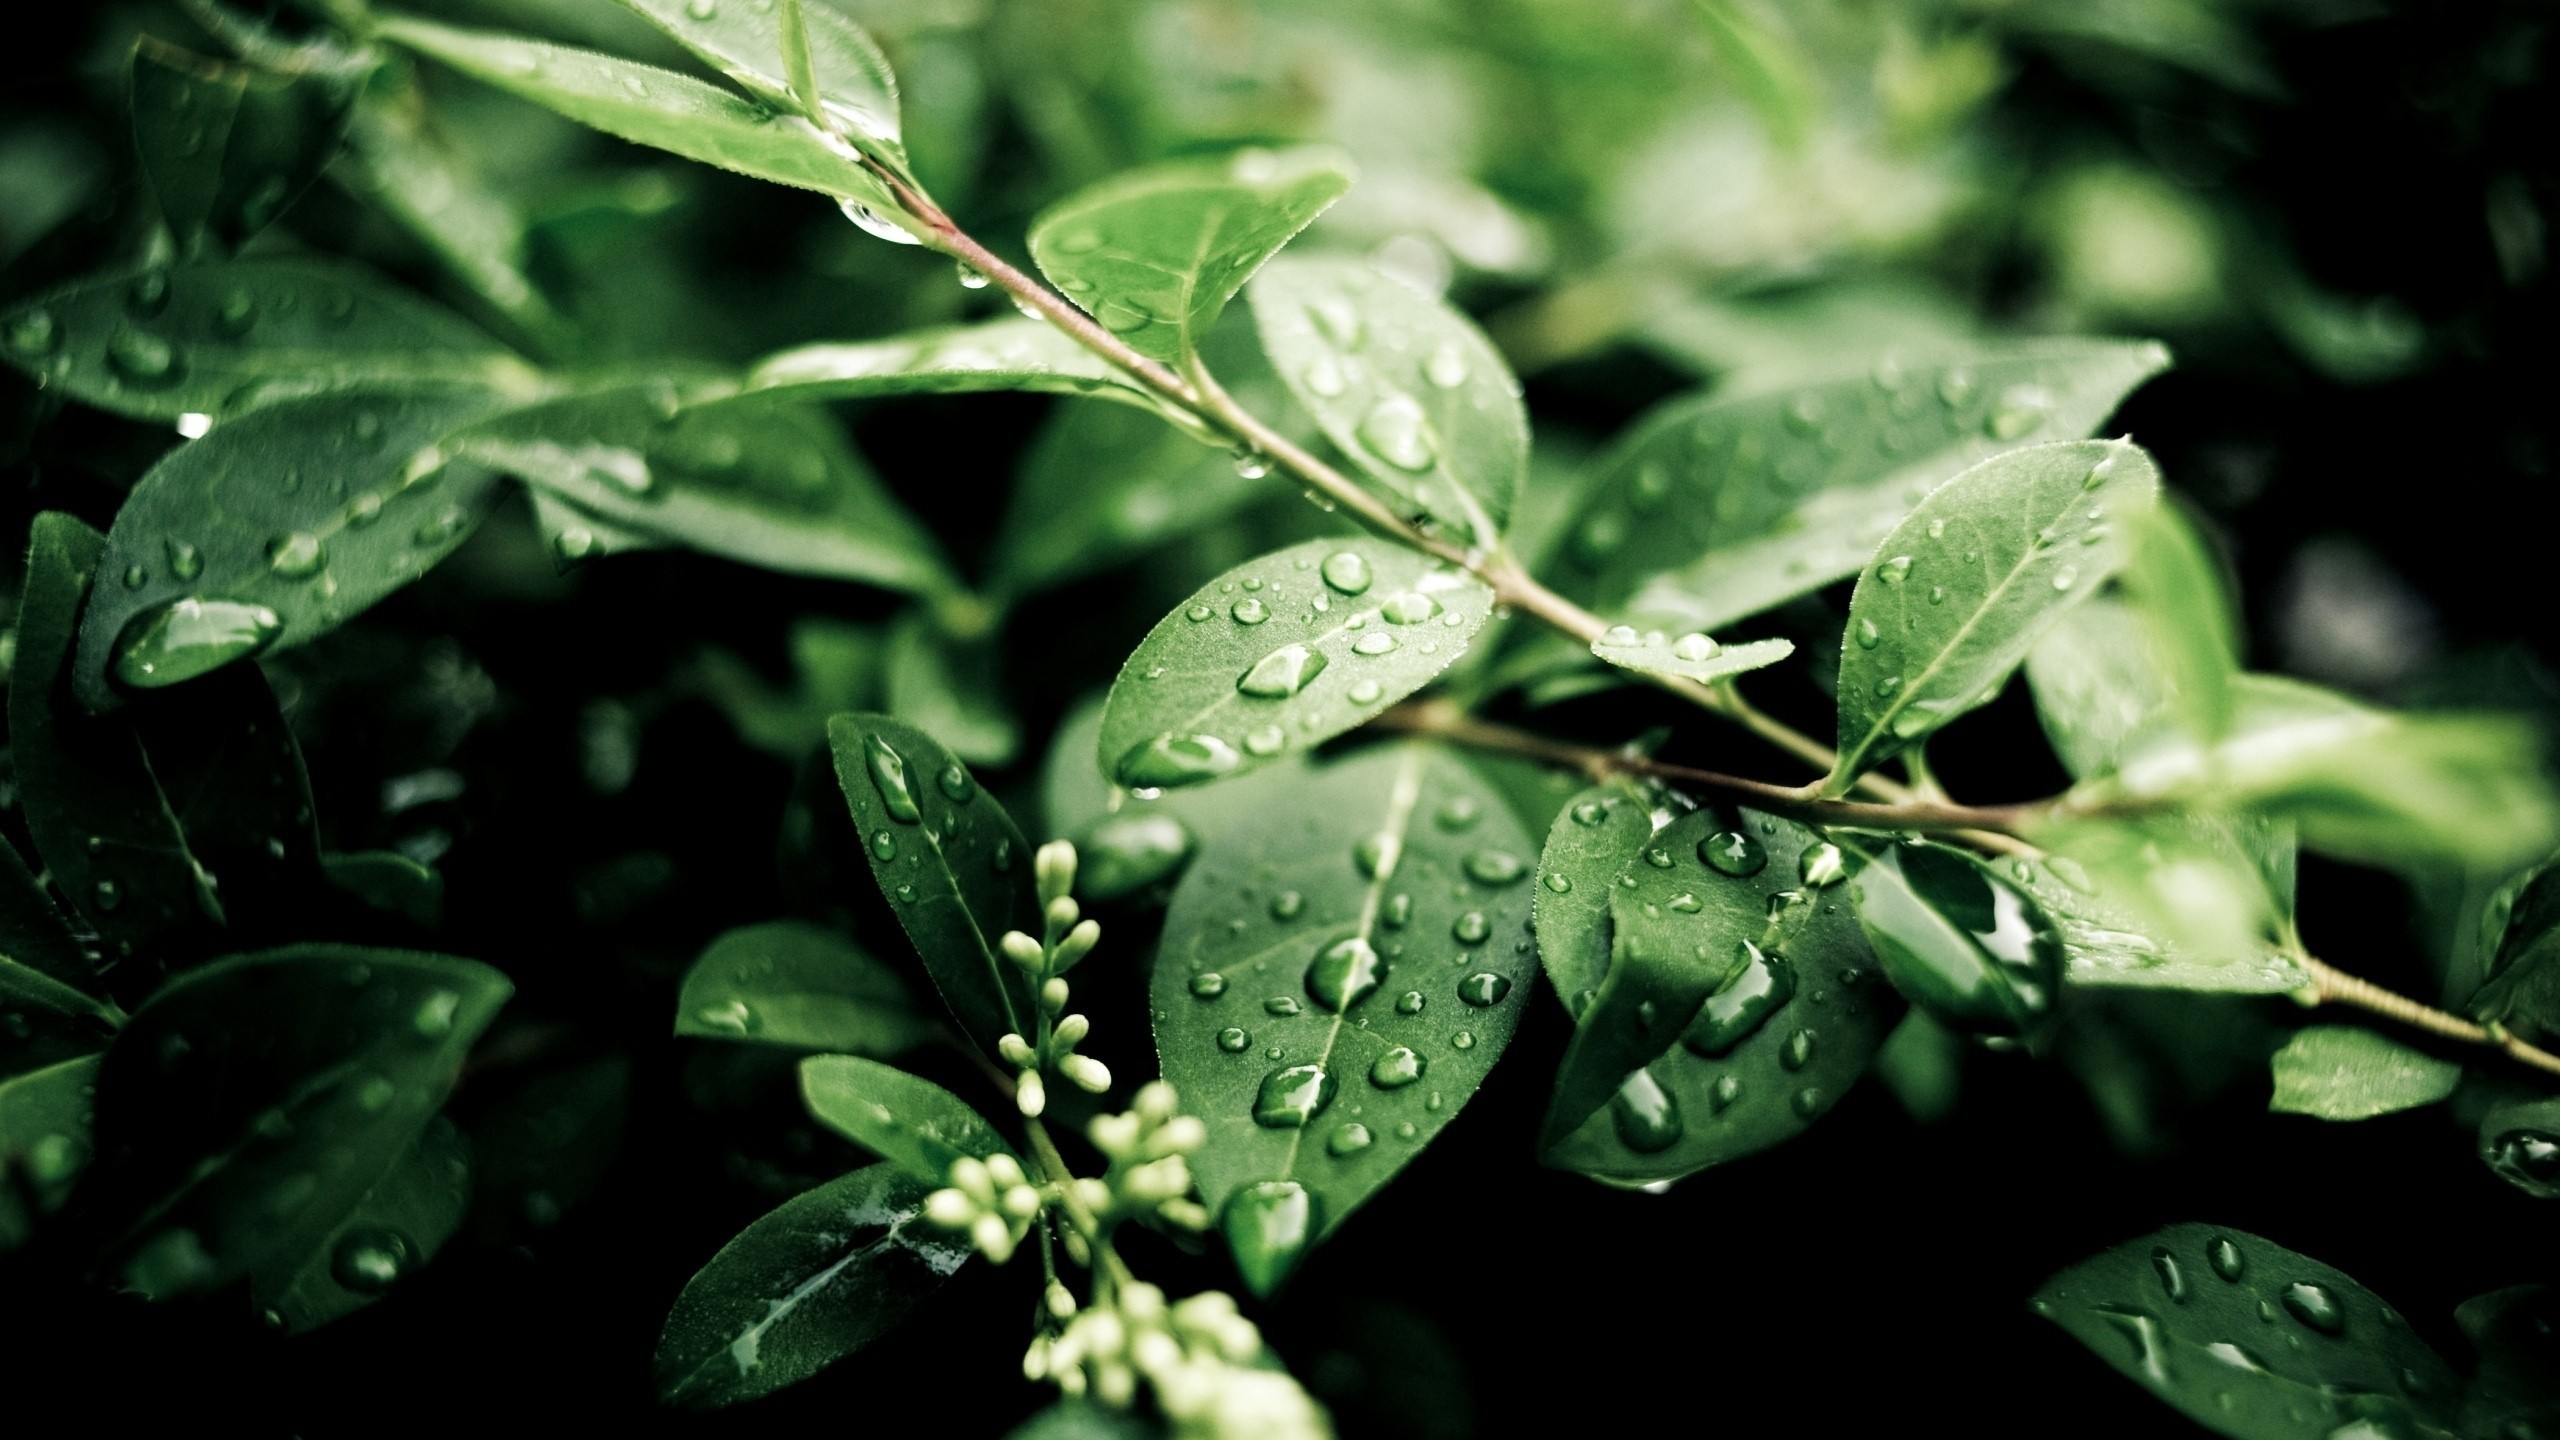 General 2560x1440 plants nature leaves depth of field branch water drops